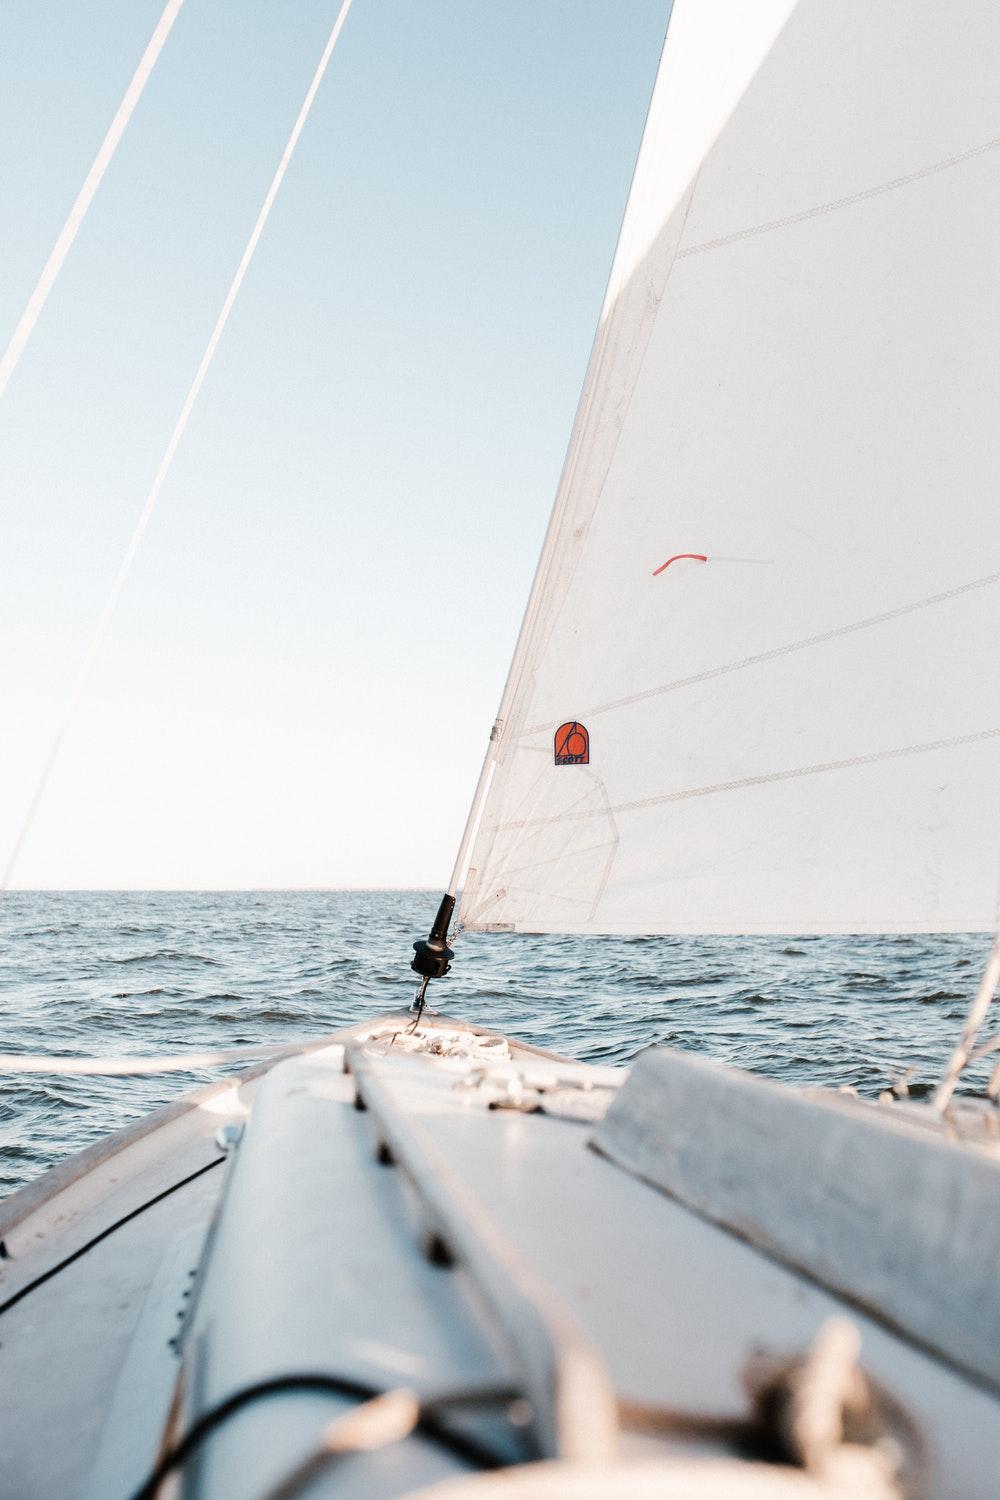 Sailing Picture. Download Free Image